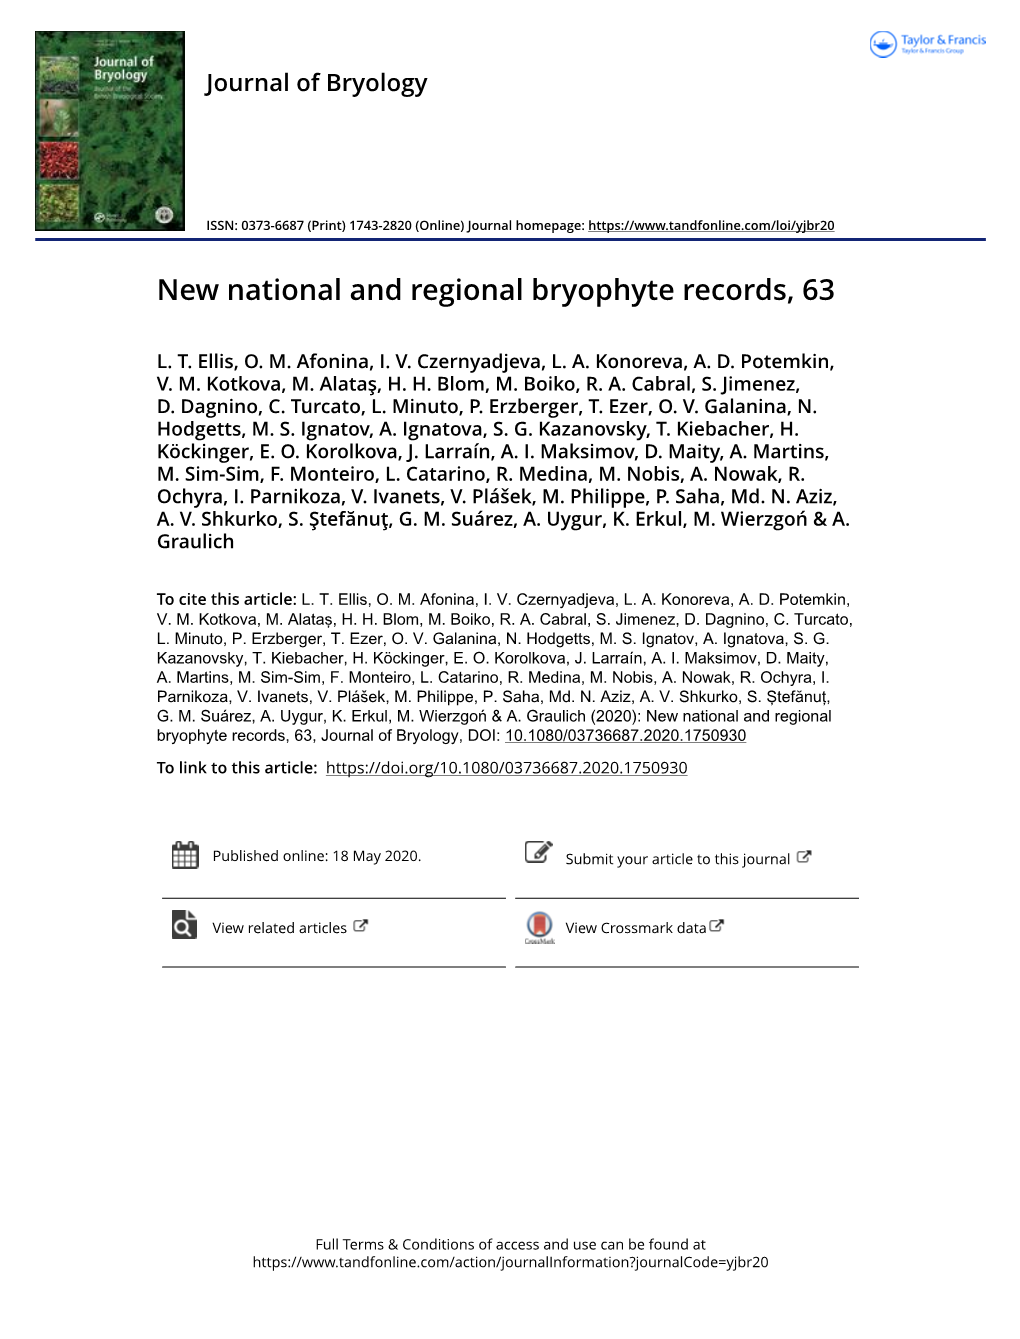 New National and Regional Bryophyte Records, 63